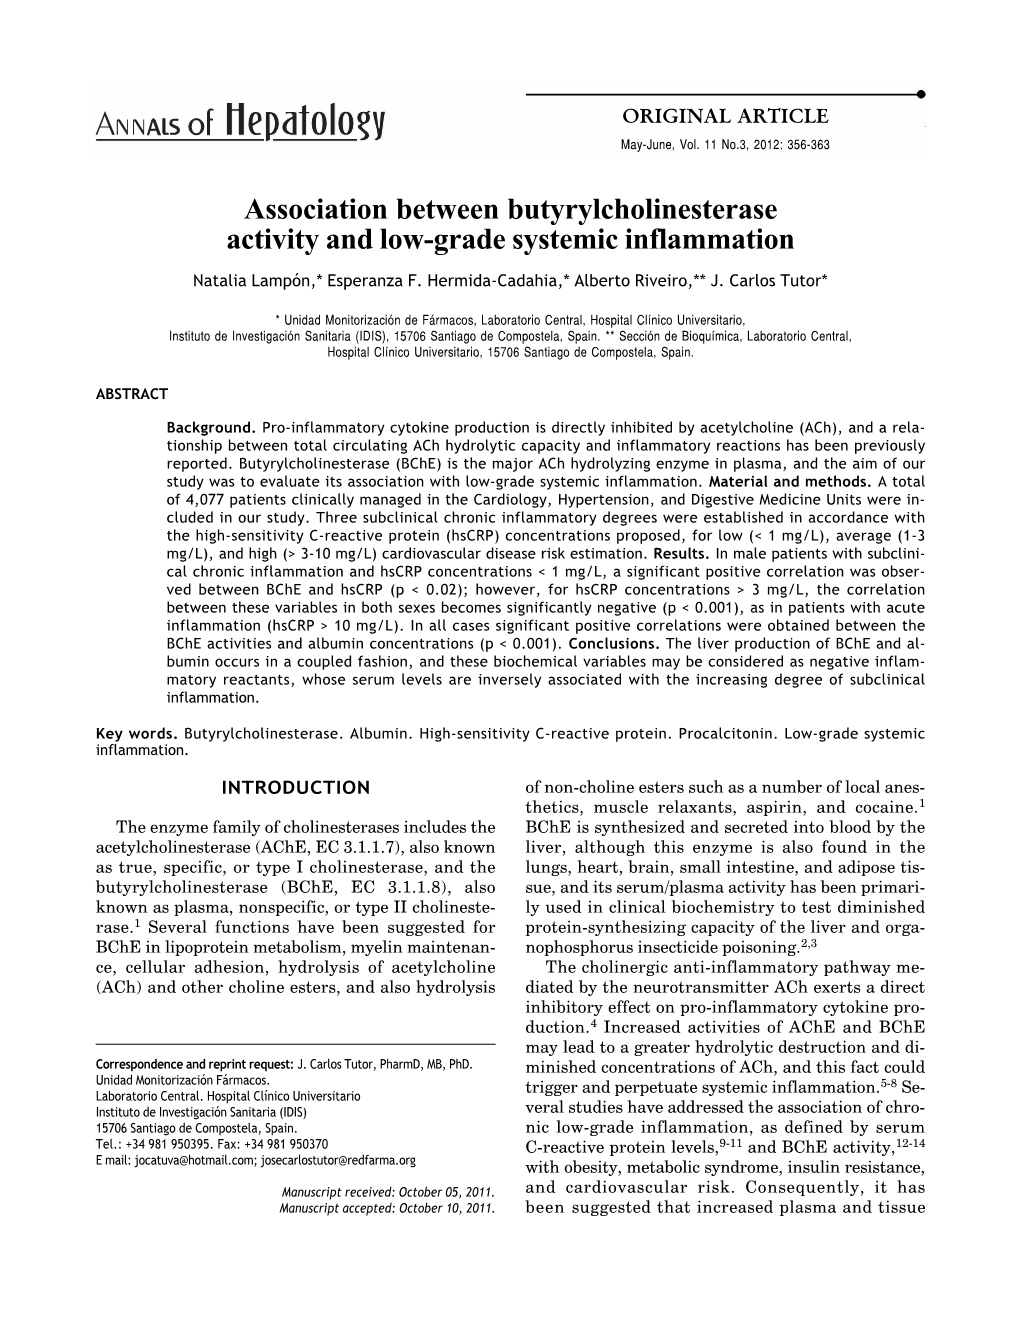 Association Between Butyrylcholinesterase Activity and Low-Grade Systemic Inflammation